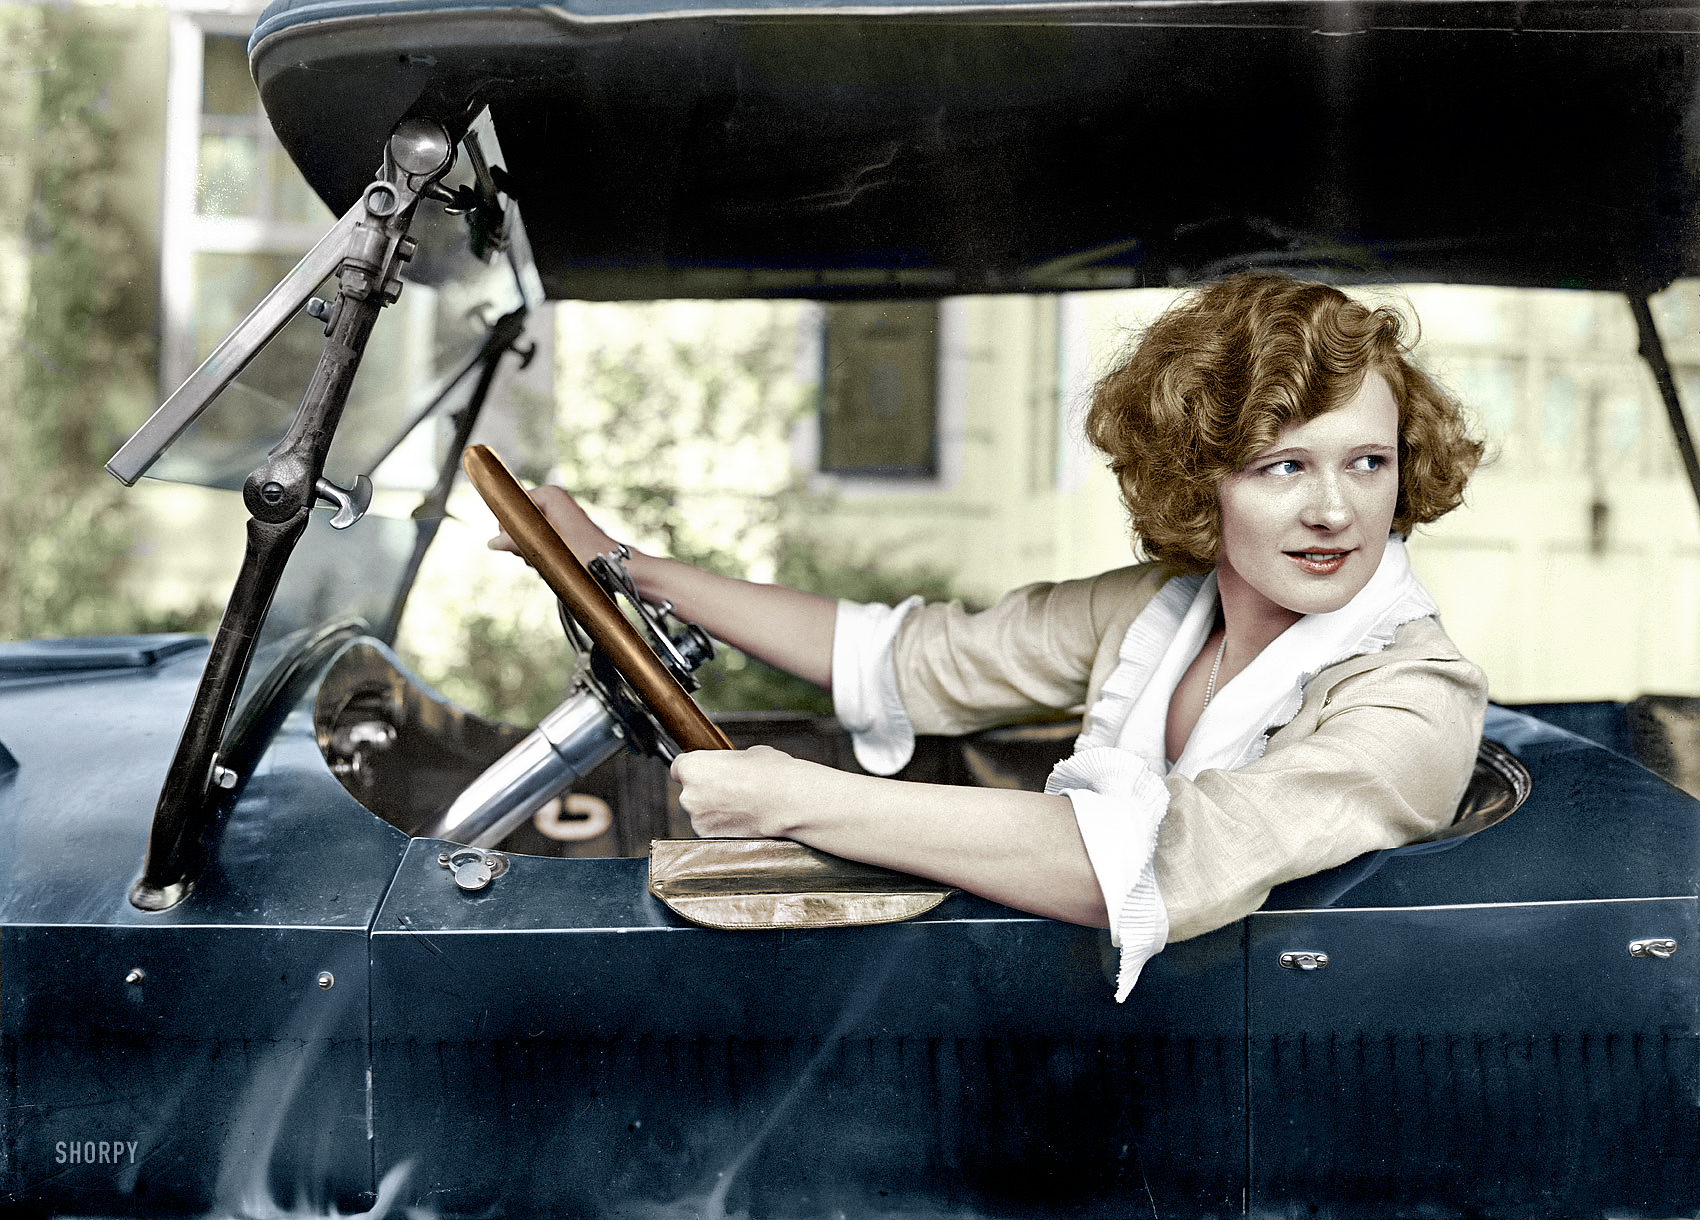 I couldn't resist this Shorpy image of Marilyn Miller. Such a simple yet compelling scene. She's adorable. I used the 1920 Templar Roadster as the model for this car. The steering wheel mechanism seems unique to that make. View full size.